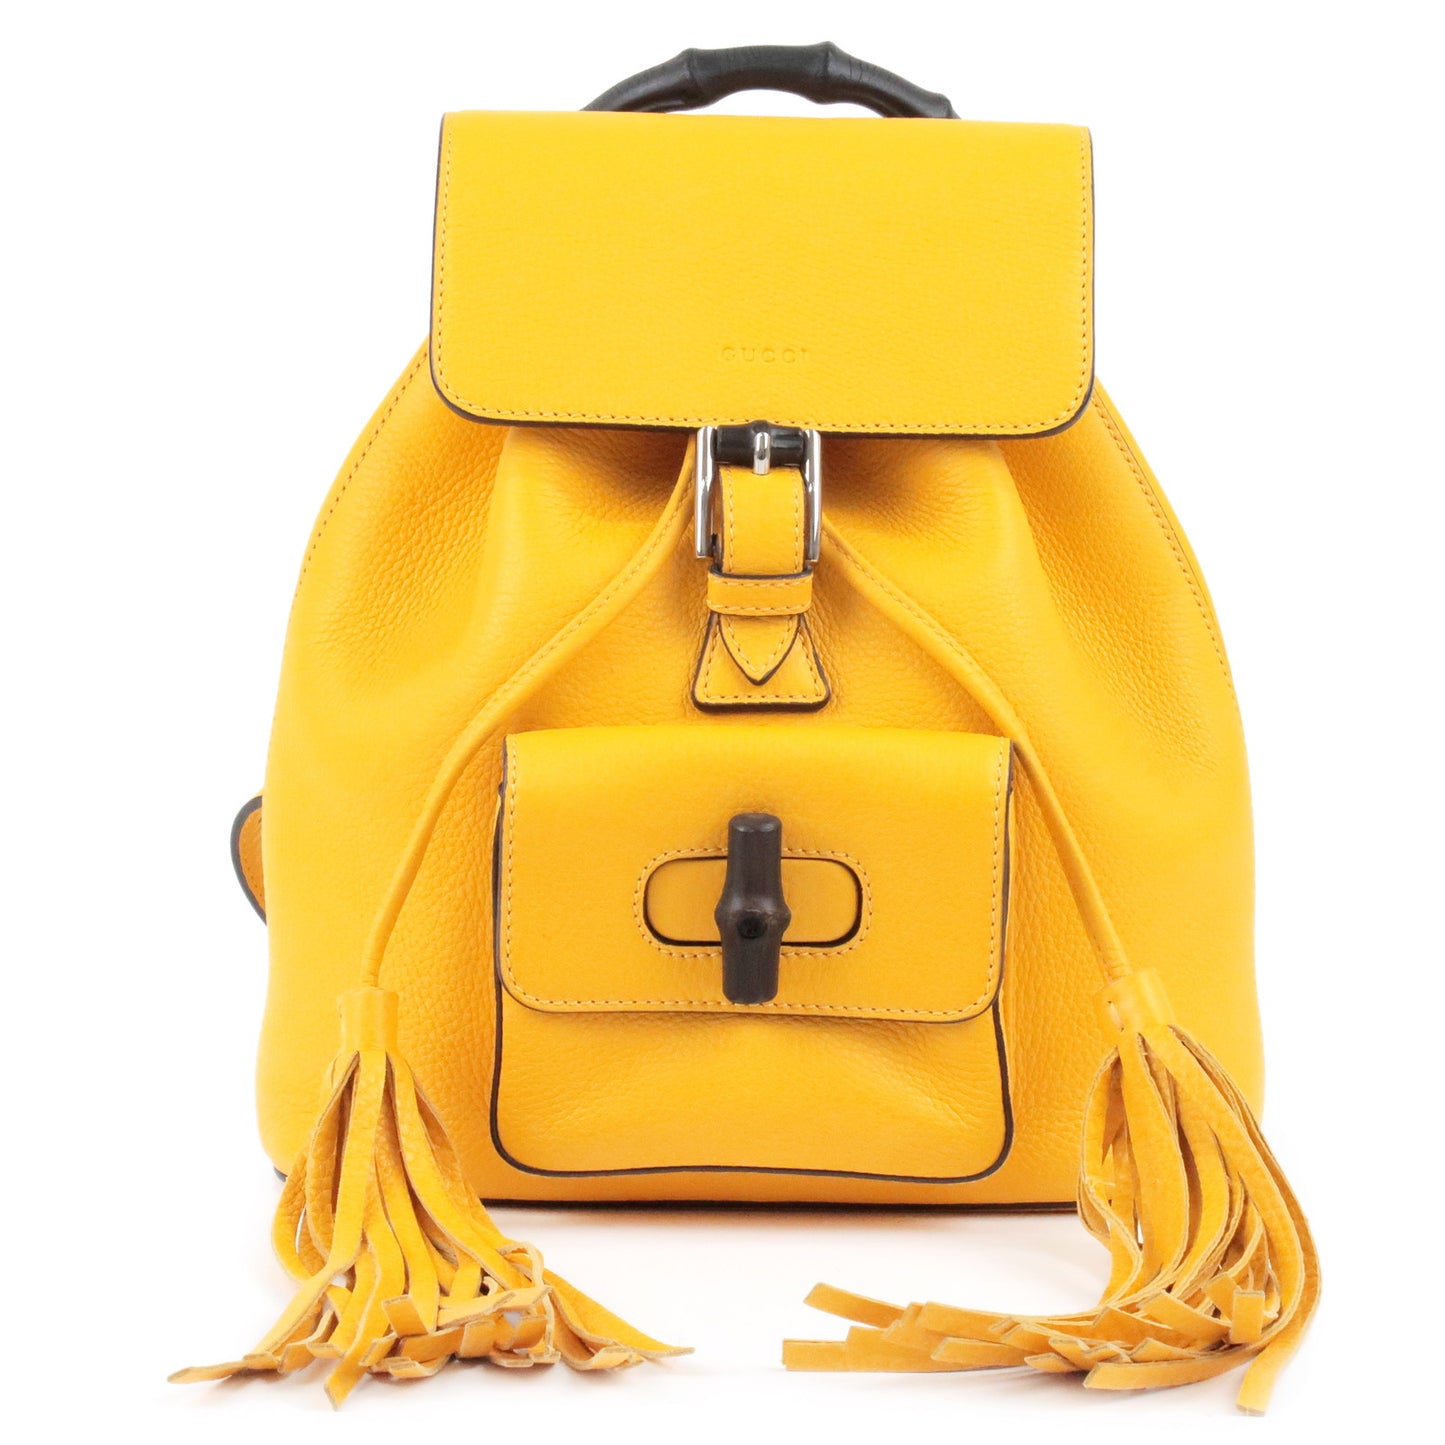 GUCCI-Bamboo-Back-Pack-With-Fringe-Leather-Yellow-387149